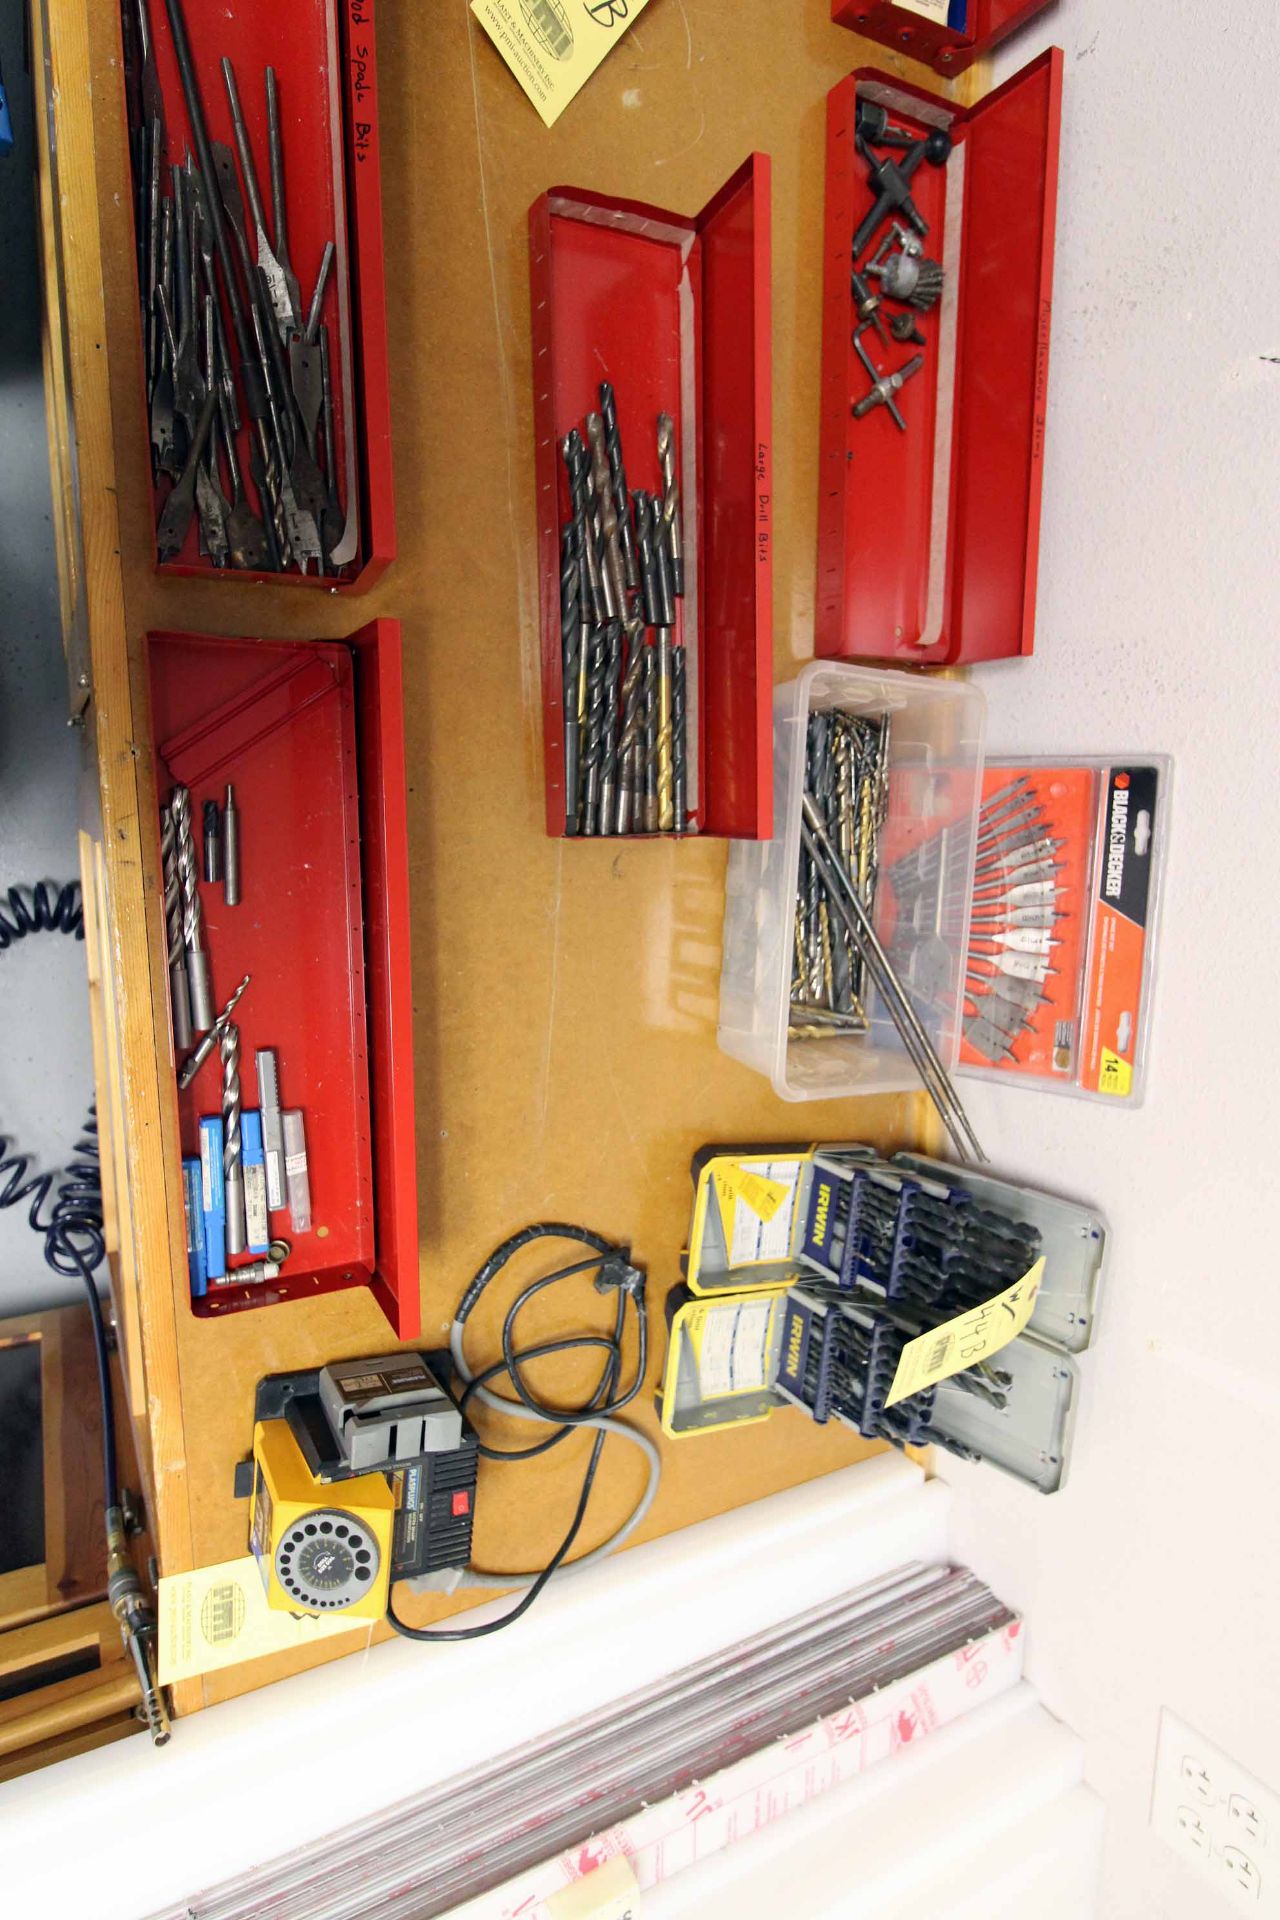 LOT CONSISTING OF: high speed drill bits, spade bits, hole saws, Ultra Sharp drill sharpener, (2) - Image 2 of 6